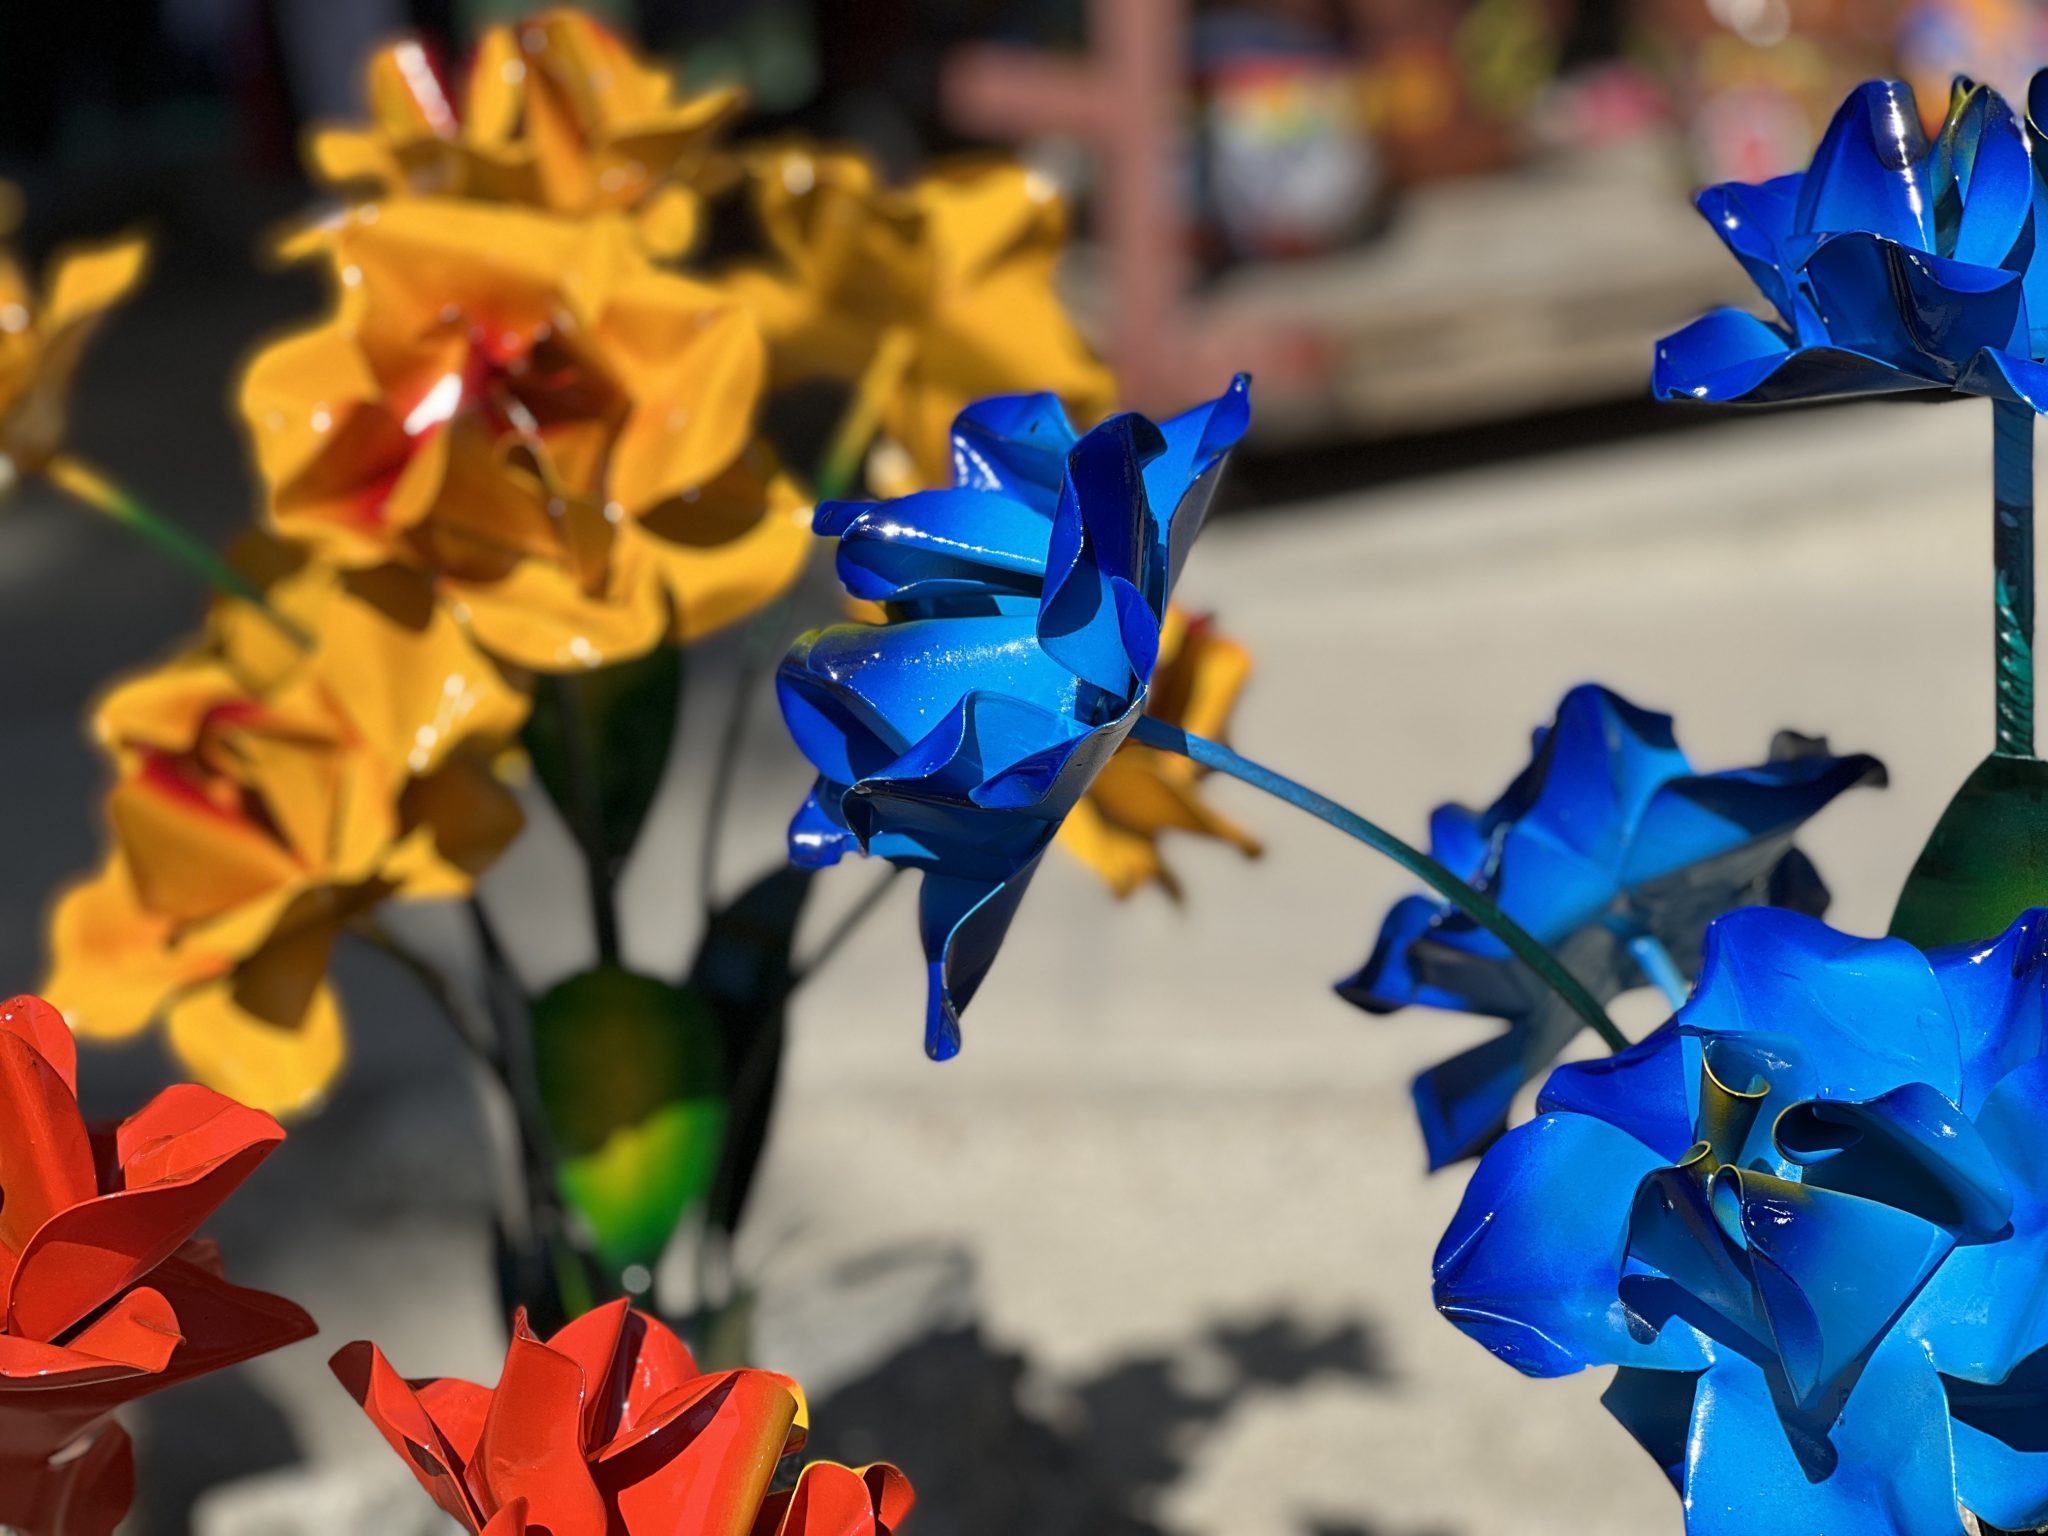 Colorful Metal Flowers in Yellow, Red, and Blue